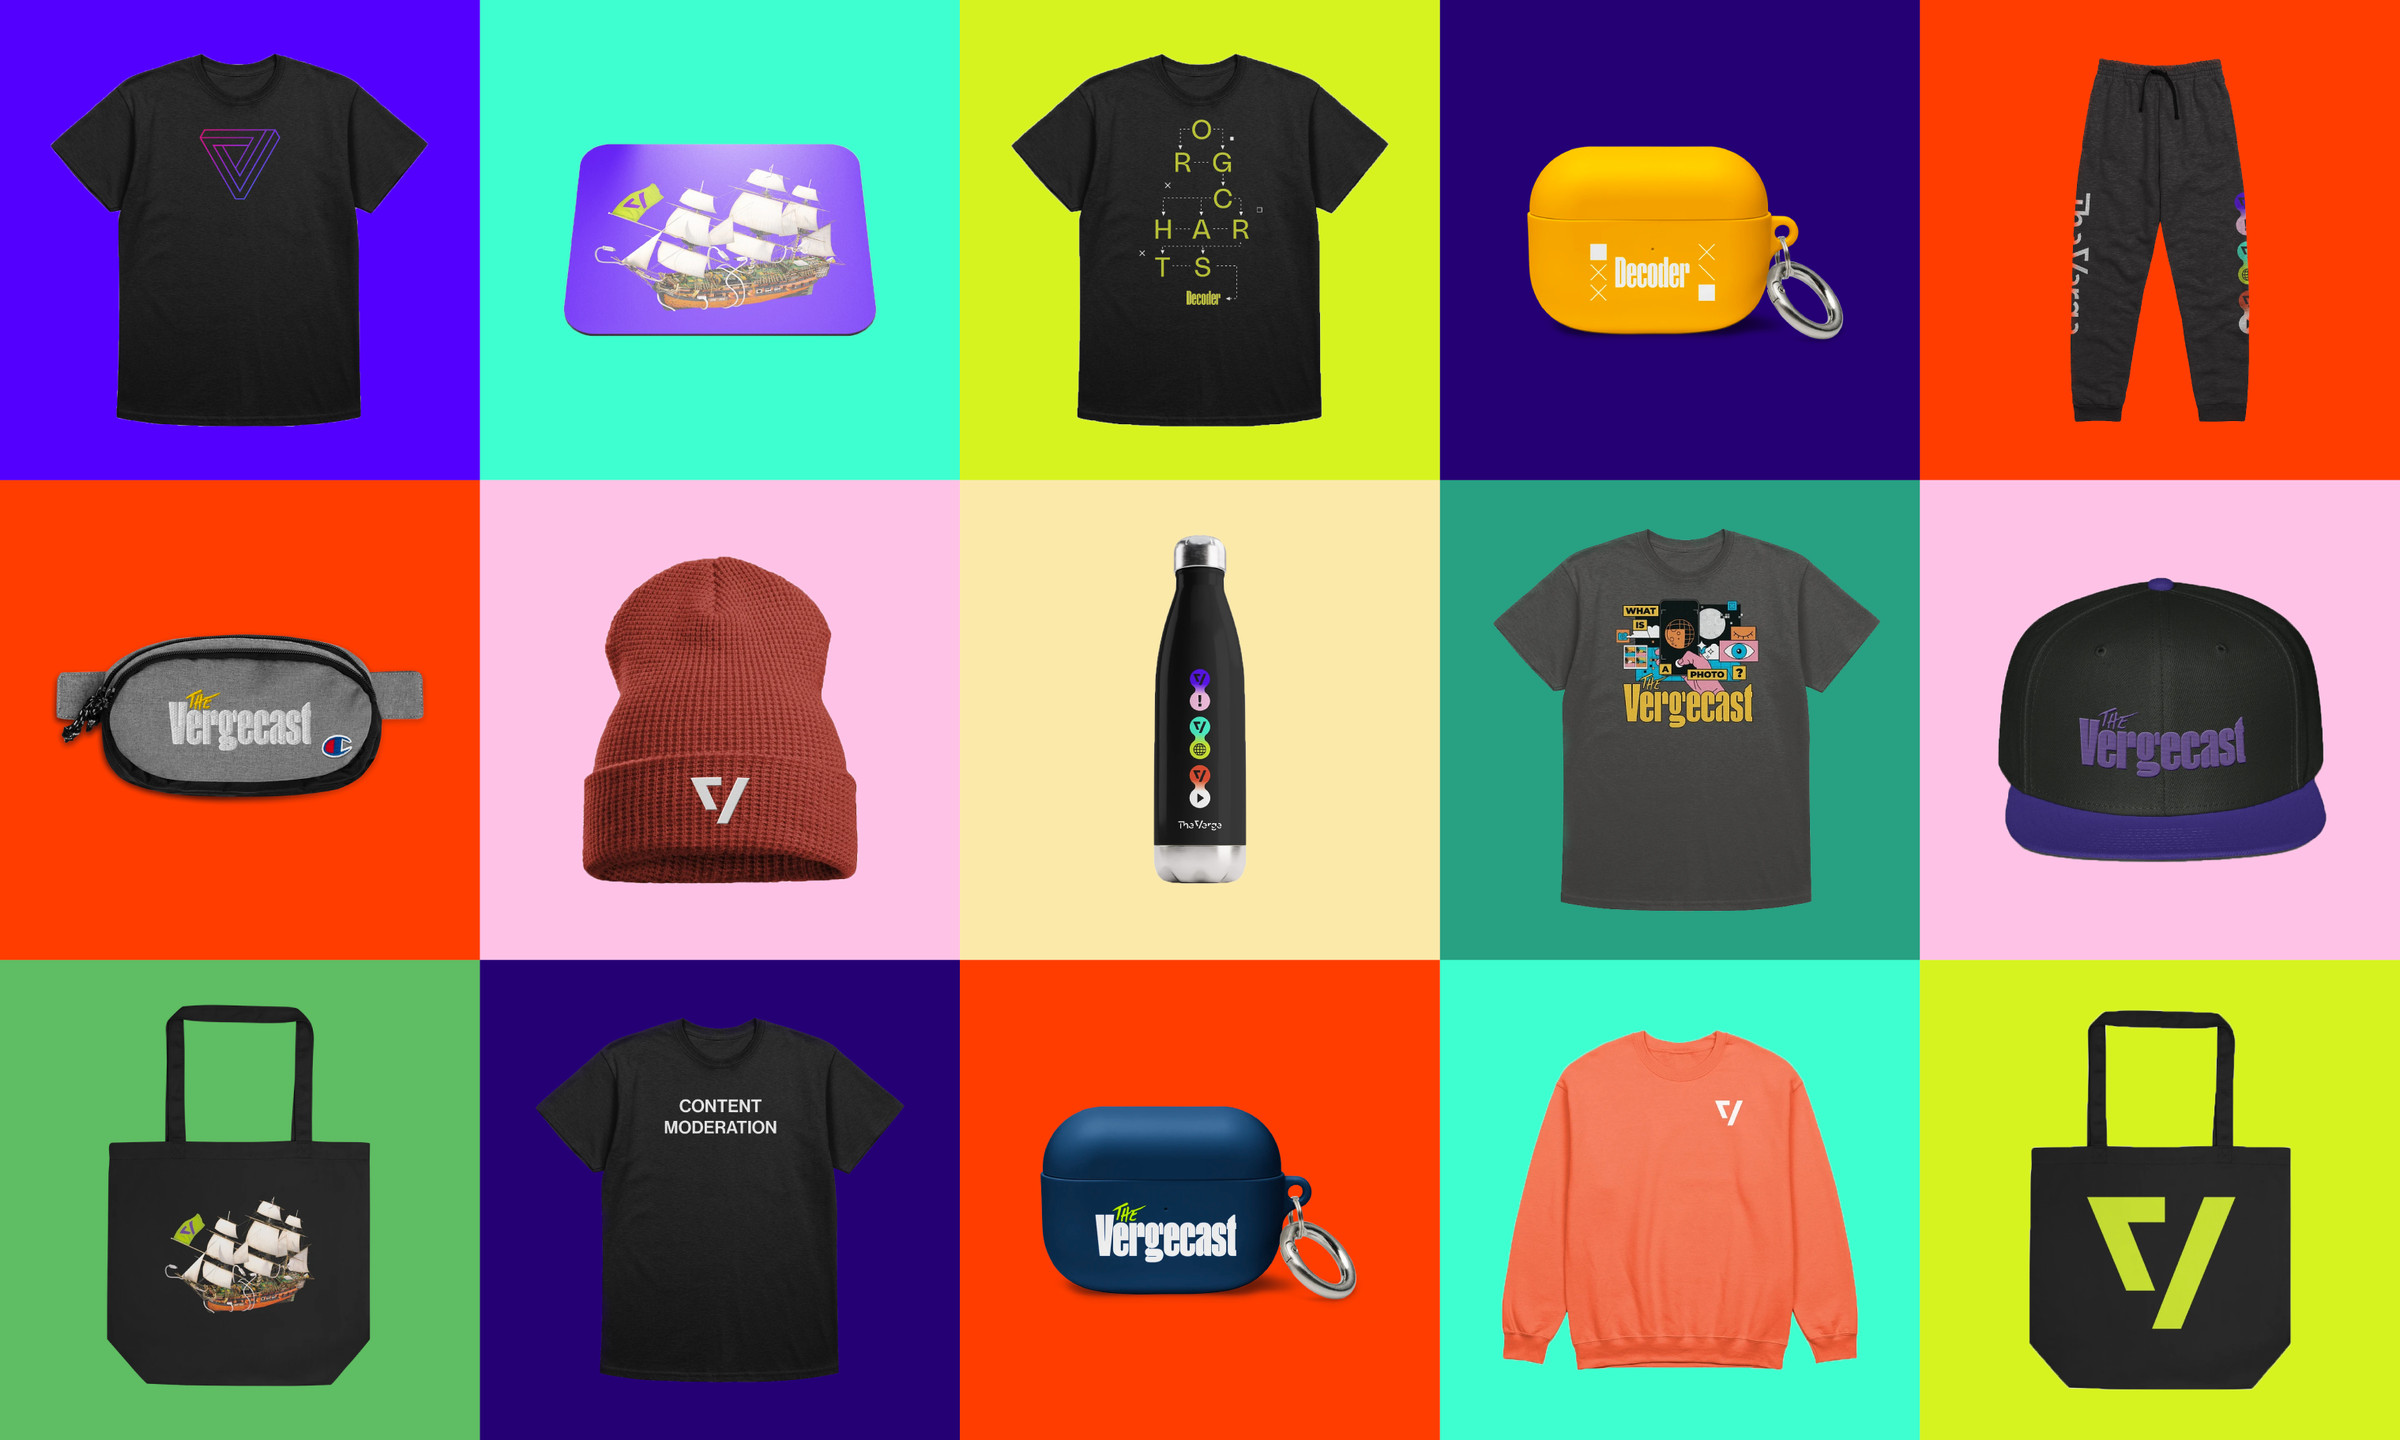 Colorful grid of various merch products from The Verge celebrating the holiday season